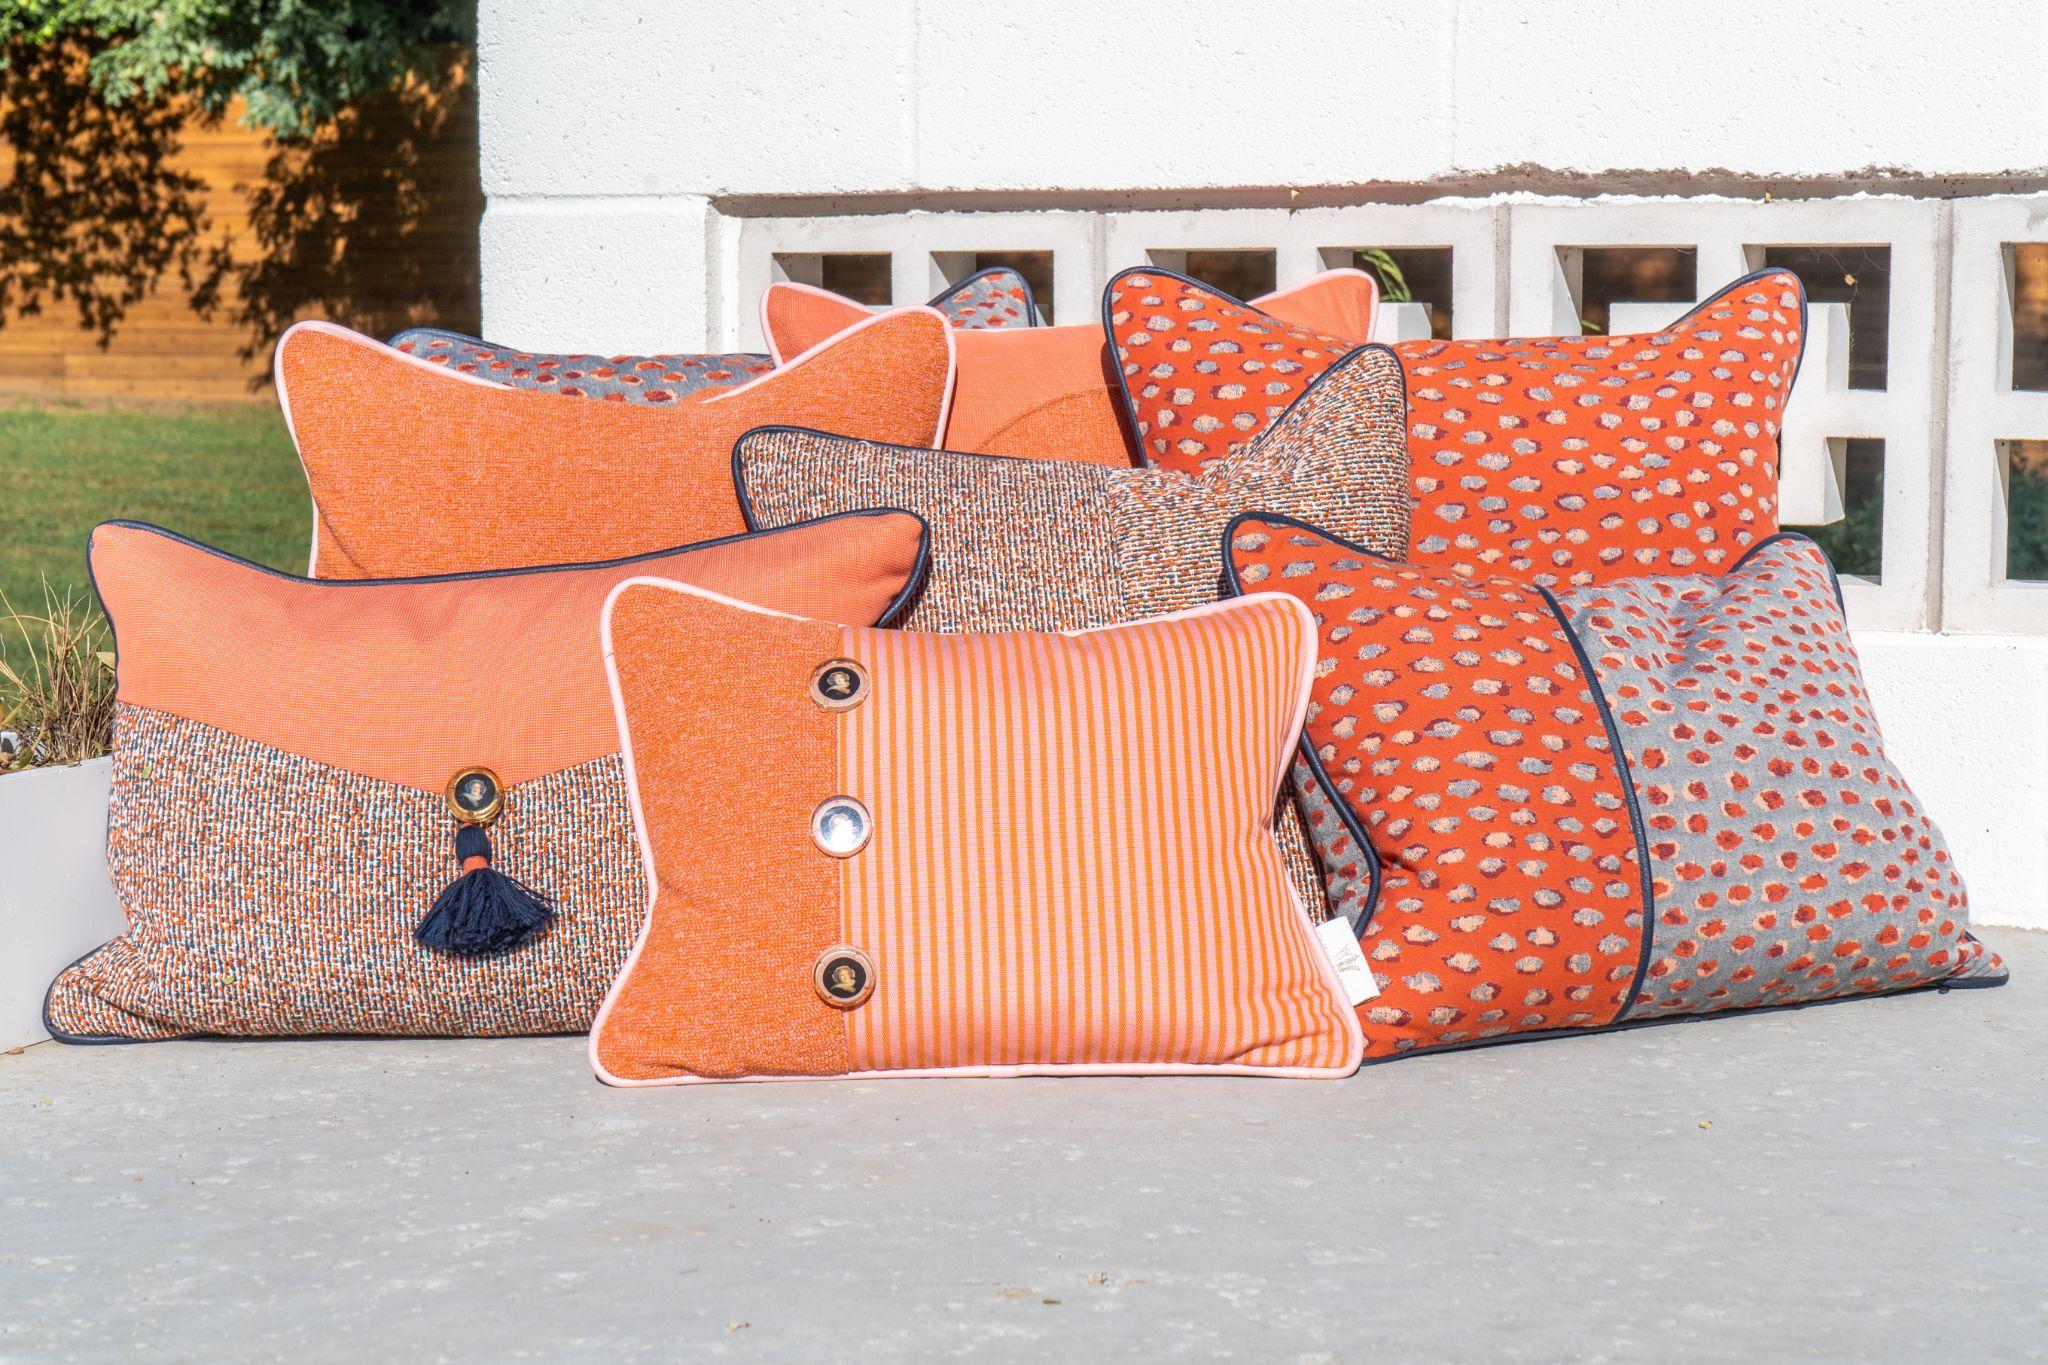 The Art of Mixing and Matching Custom Cushions: Creating a Look That’s Uniquely You